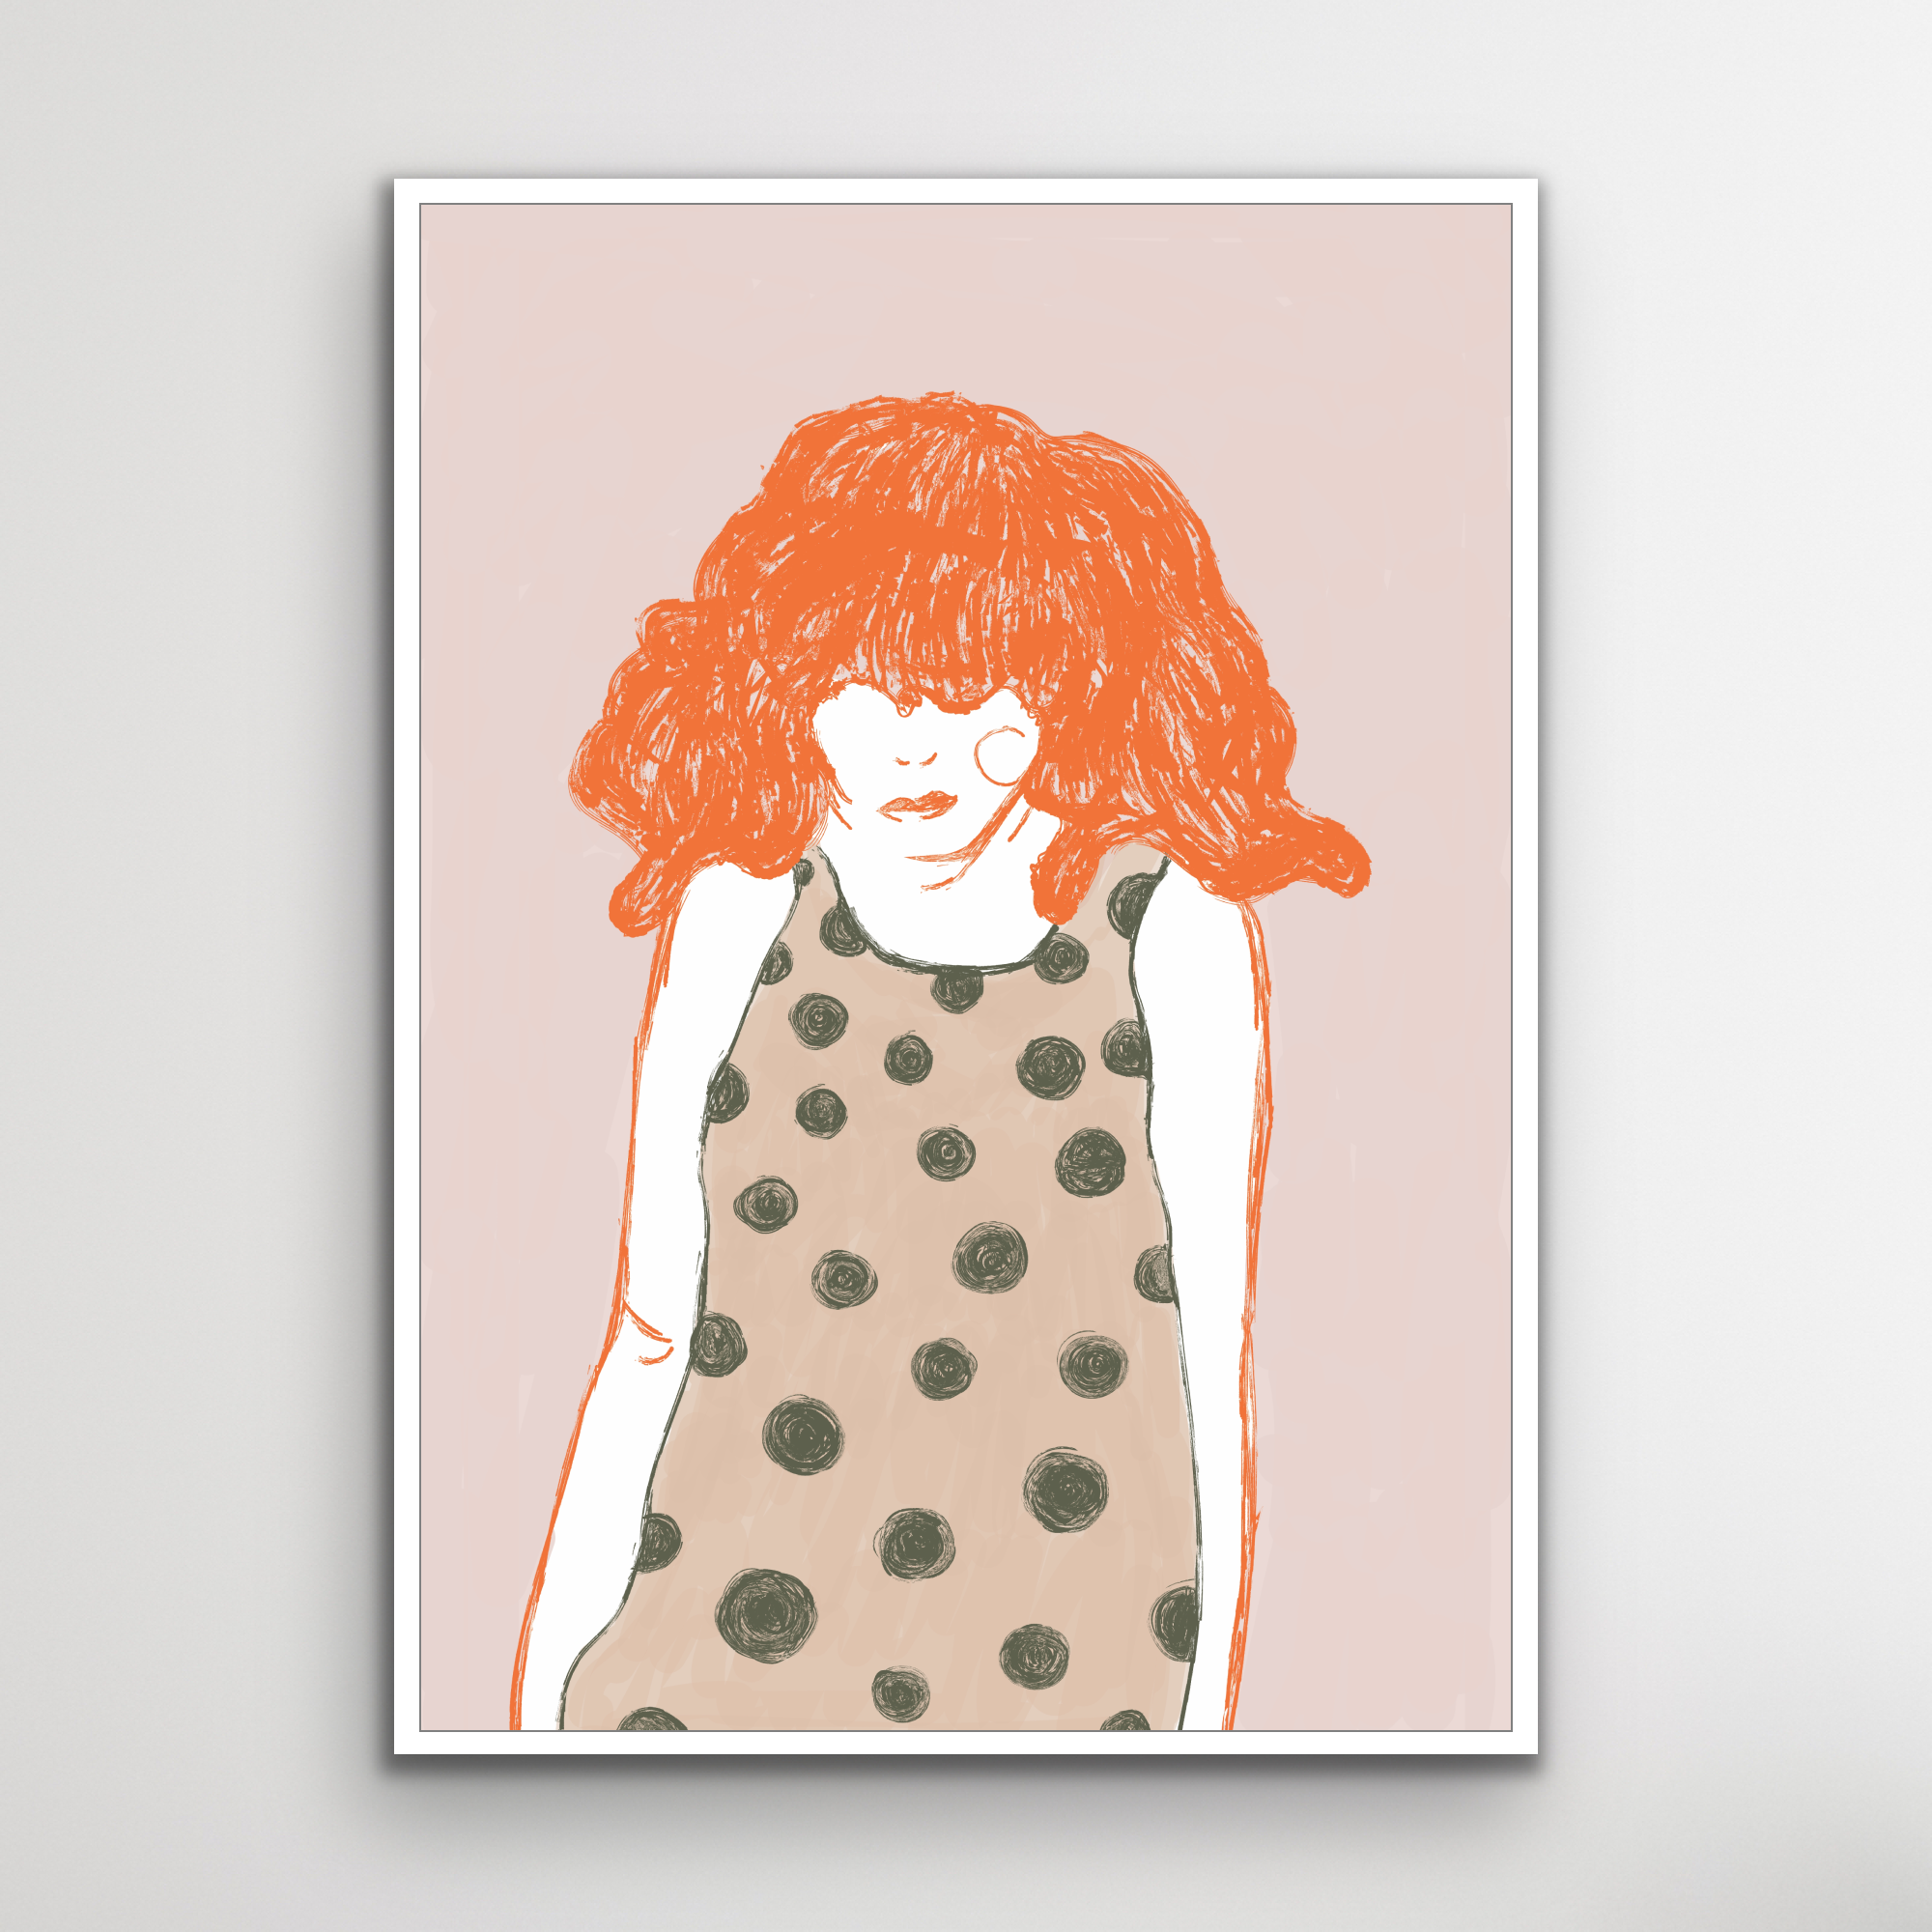 Poster: "The Red Head"